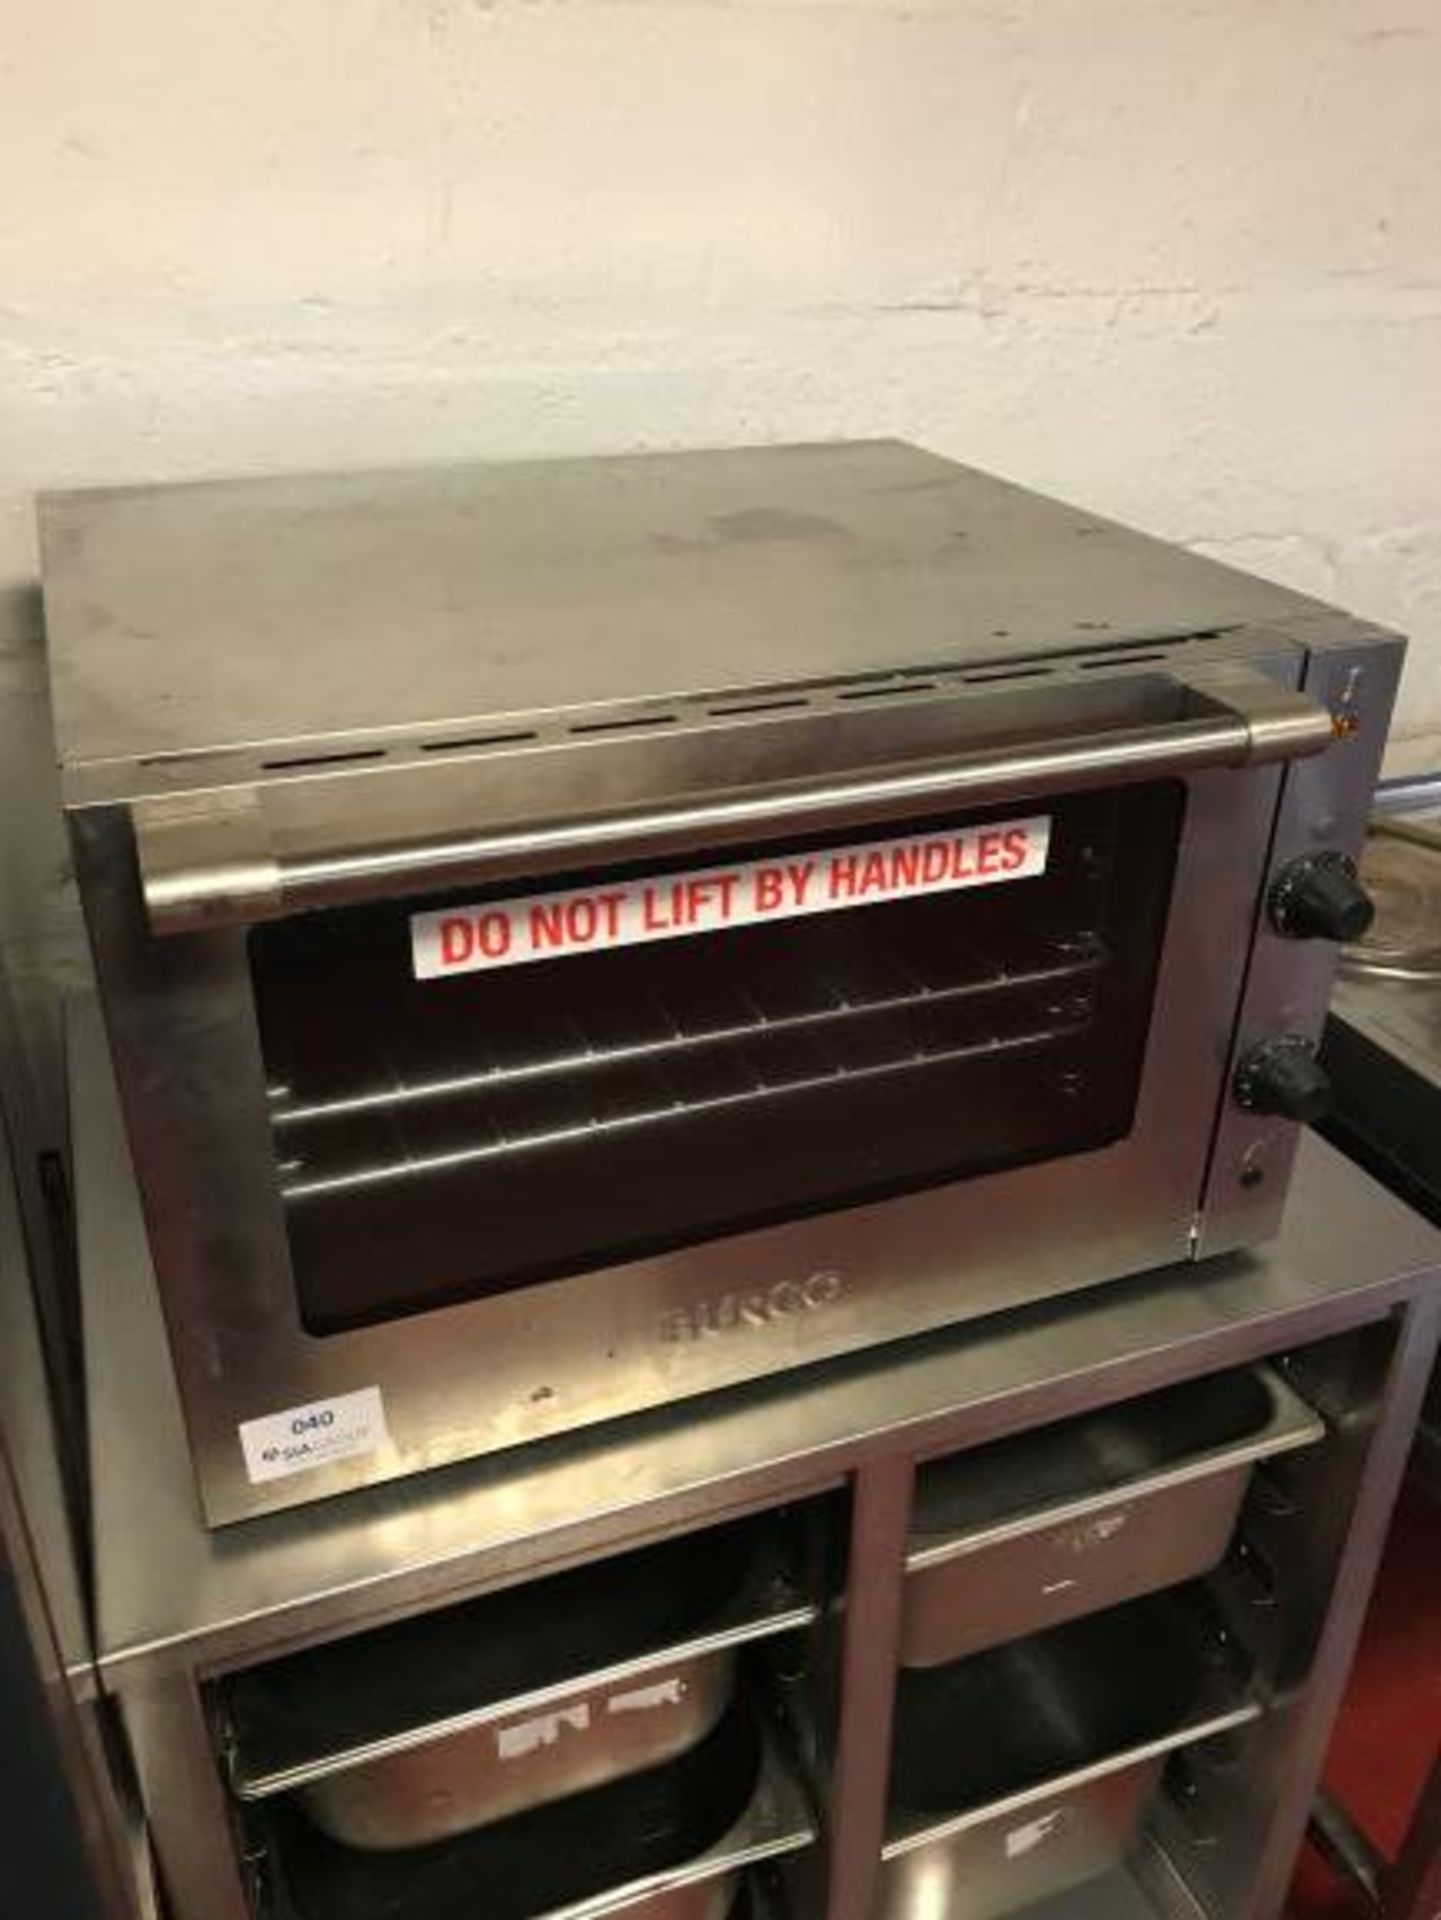 Burco BC CTC002 stainless steel countertop convection oven - Image 2 of 4